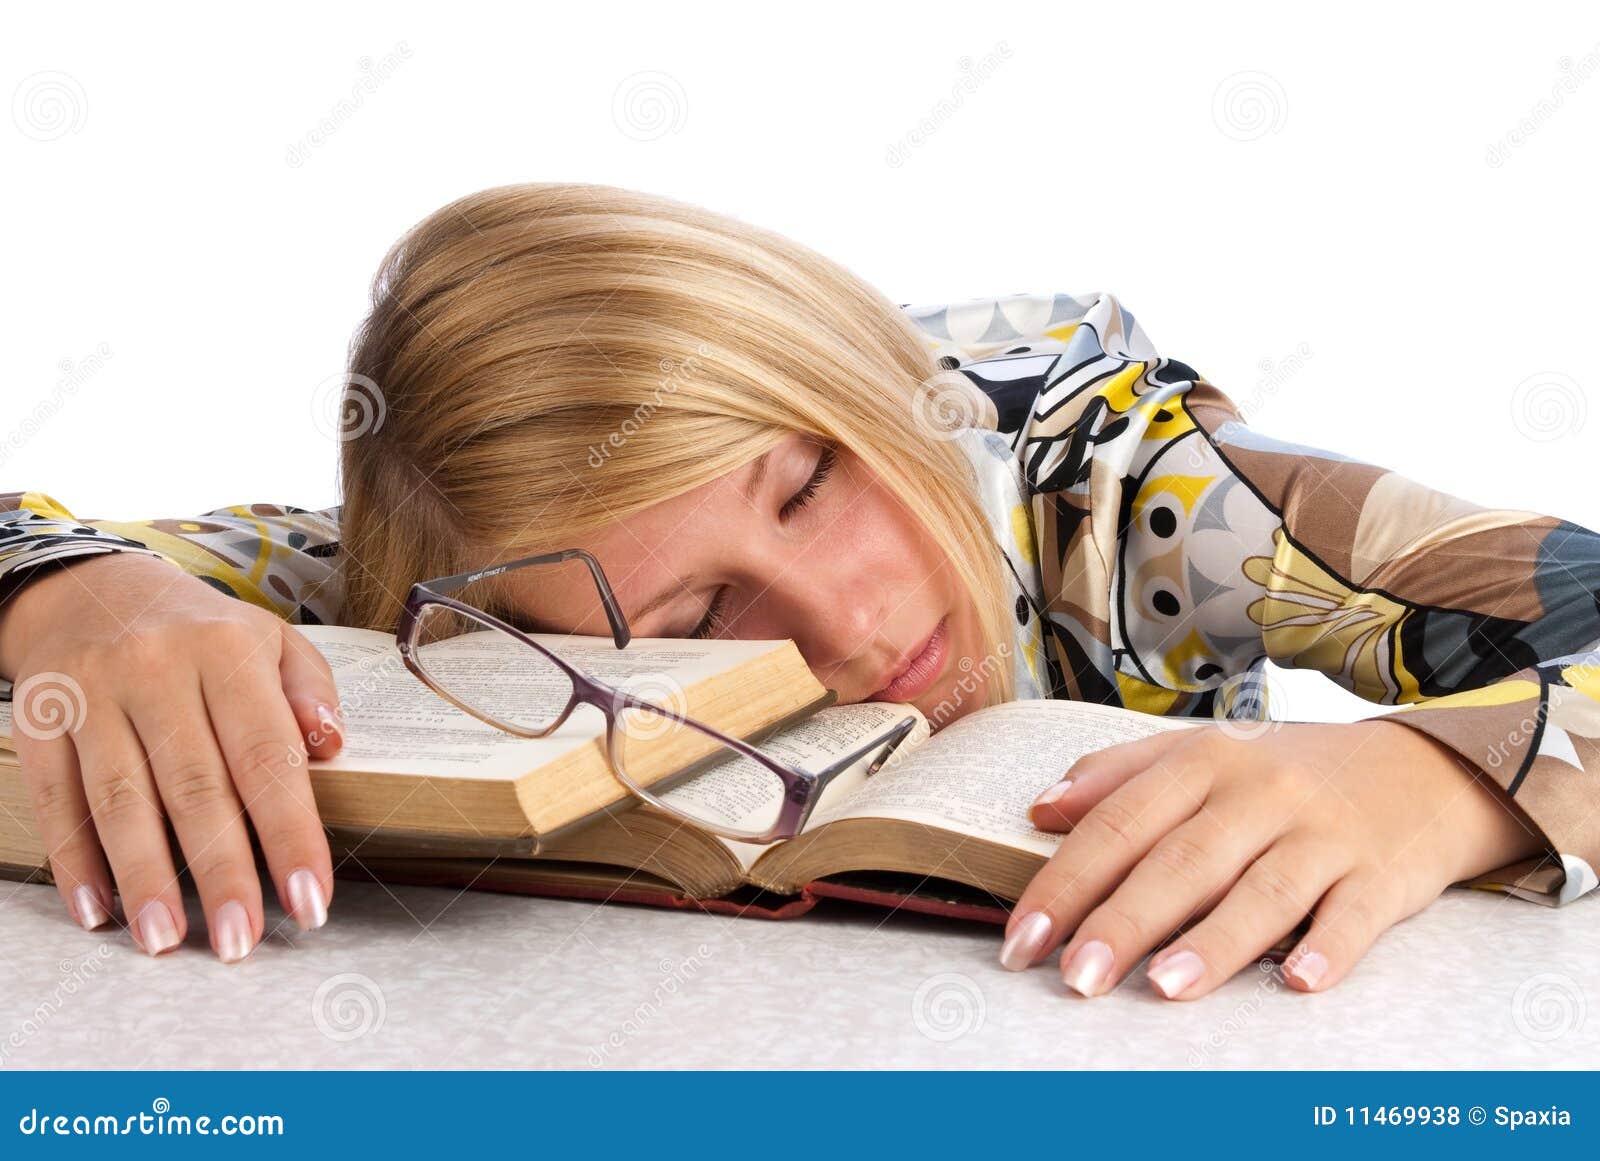 young woman tired of studying